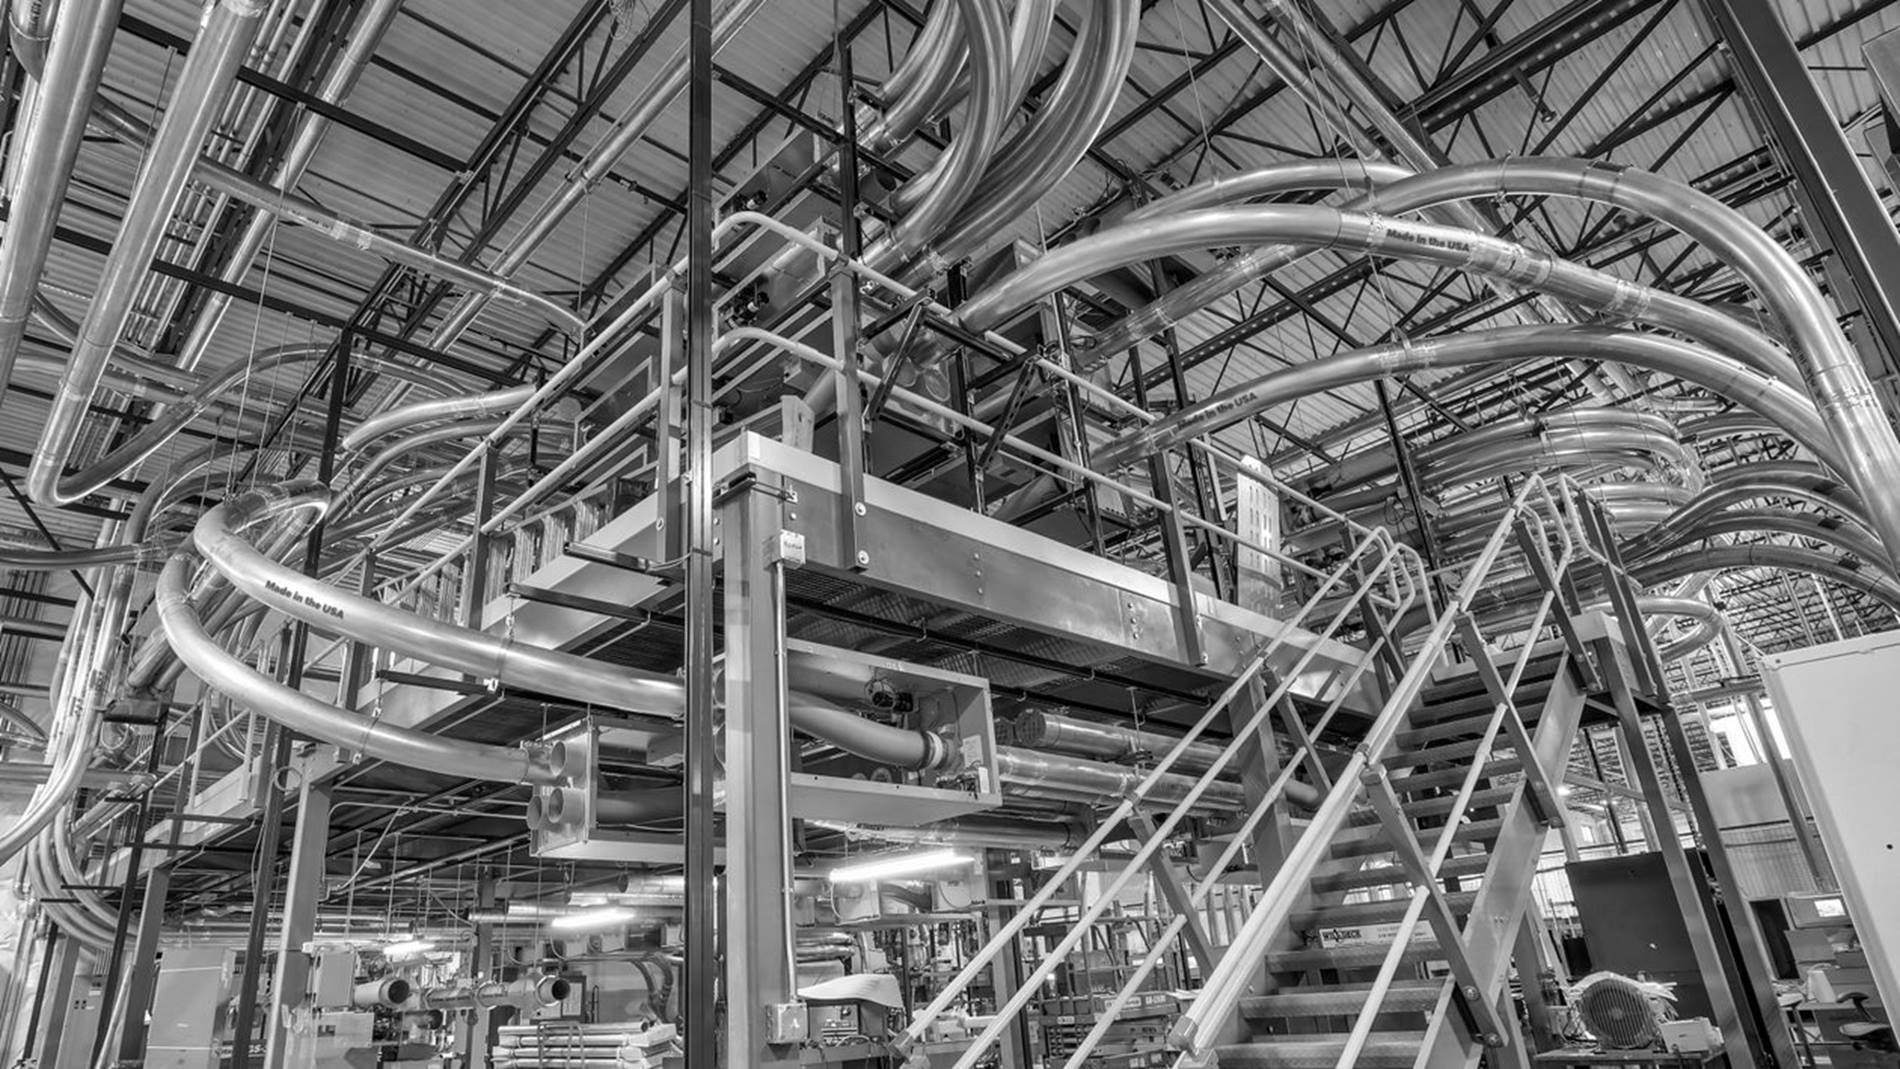 Complex pneumatic tube system in industrial area